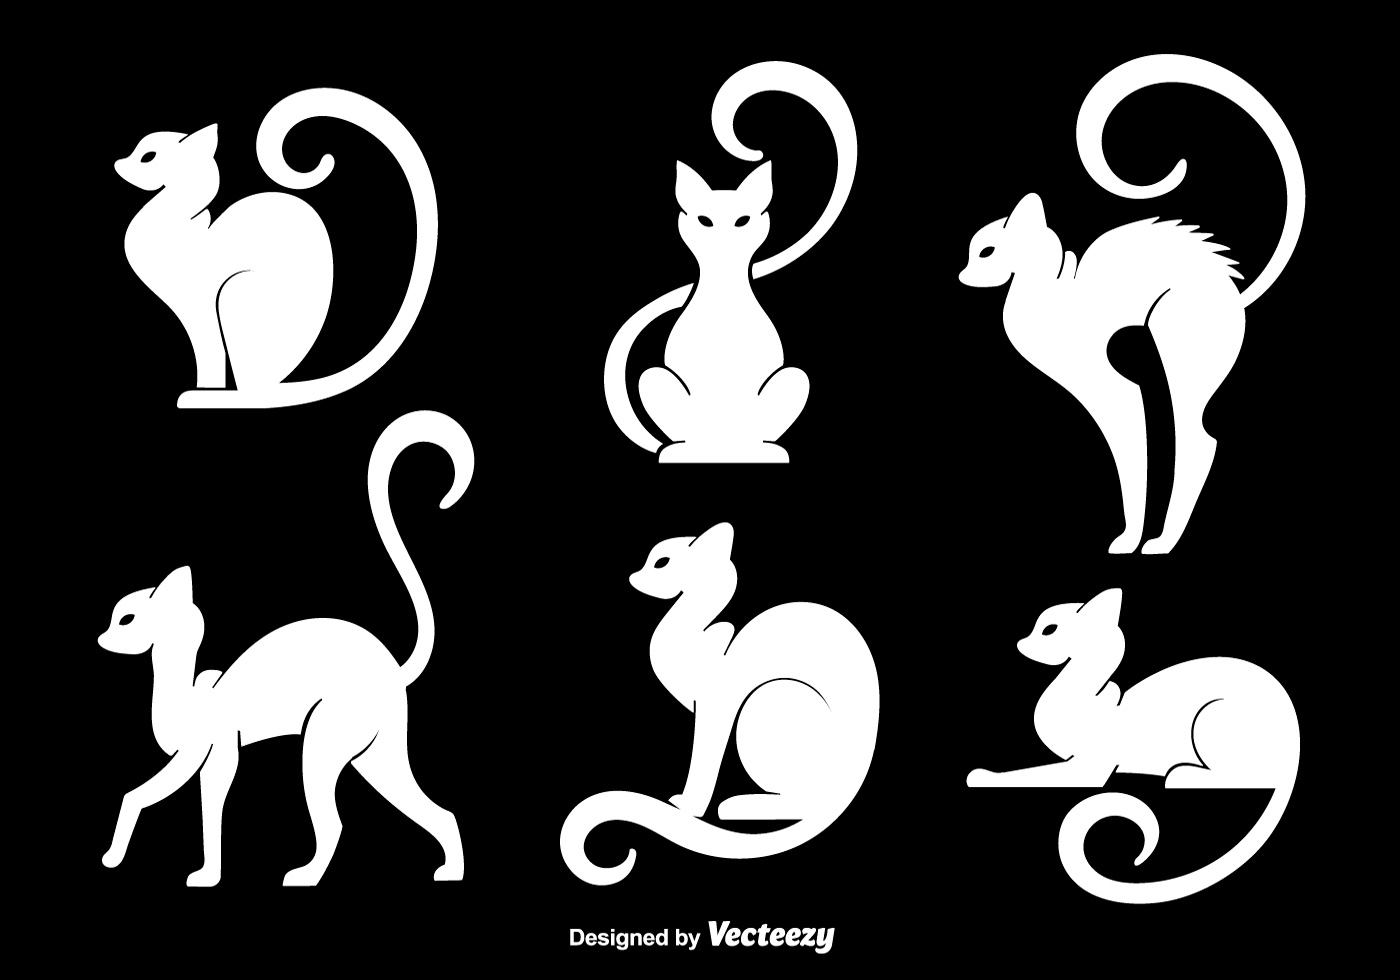 Download White cats silhouettes - Download Free Vectors, Clipart ...